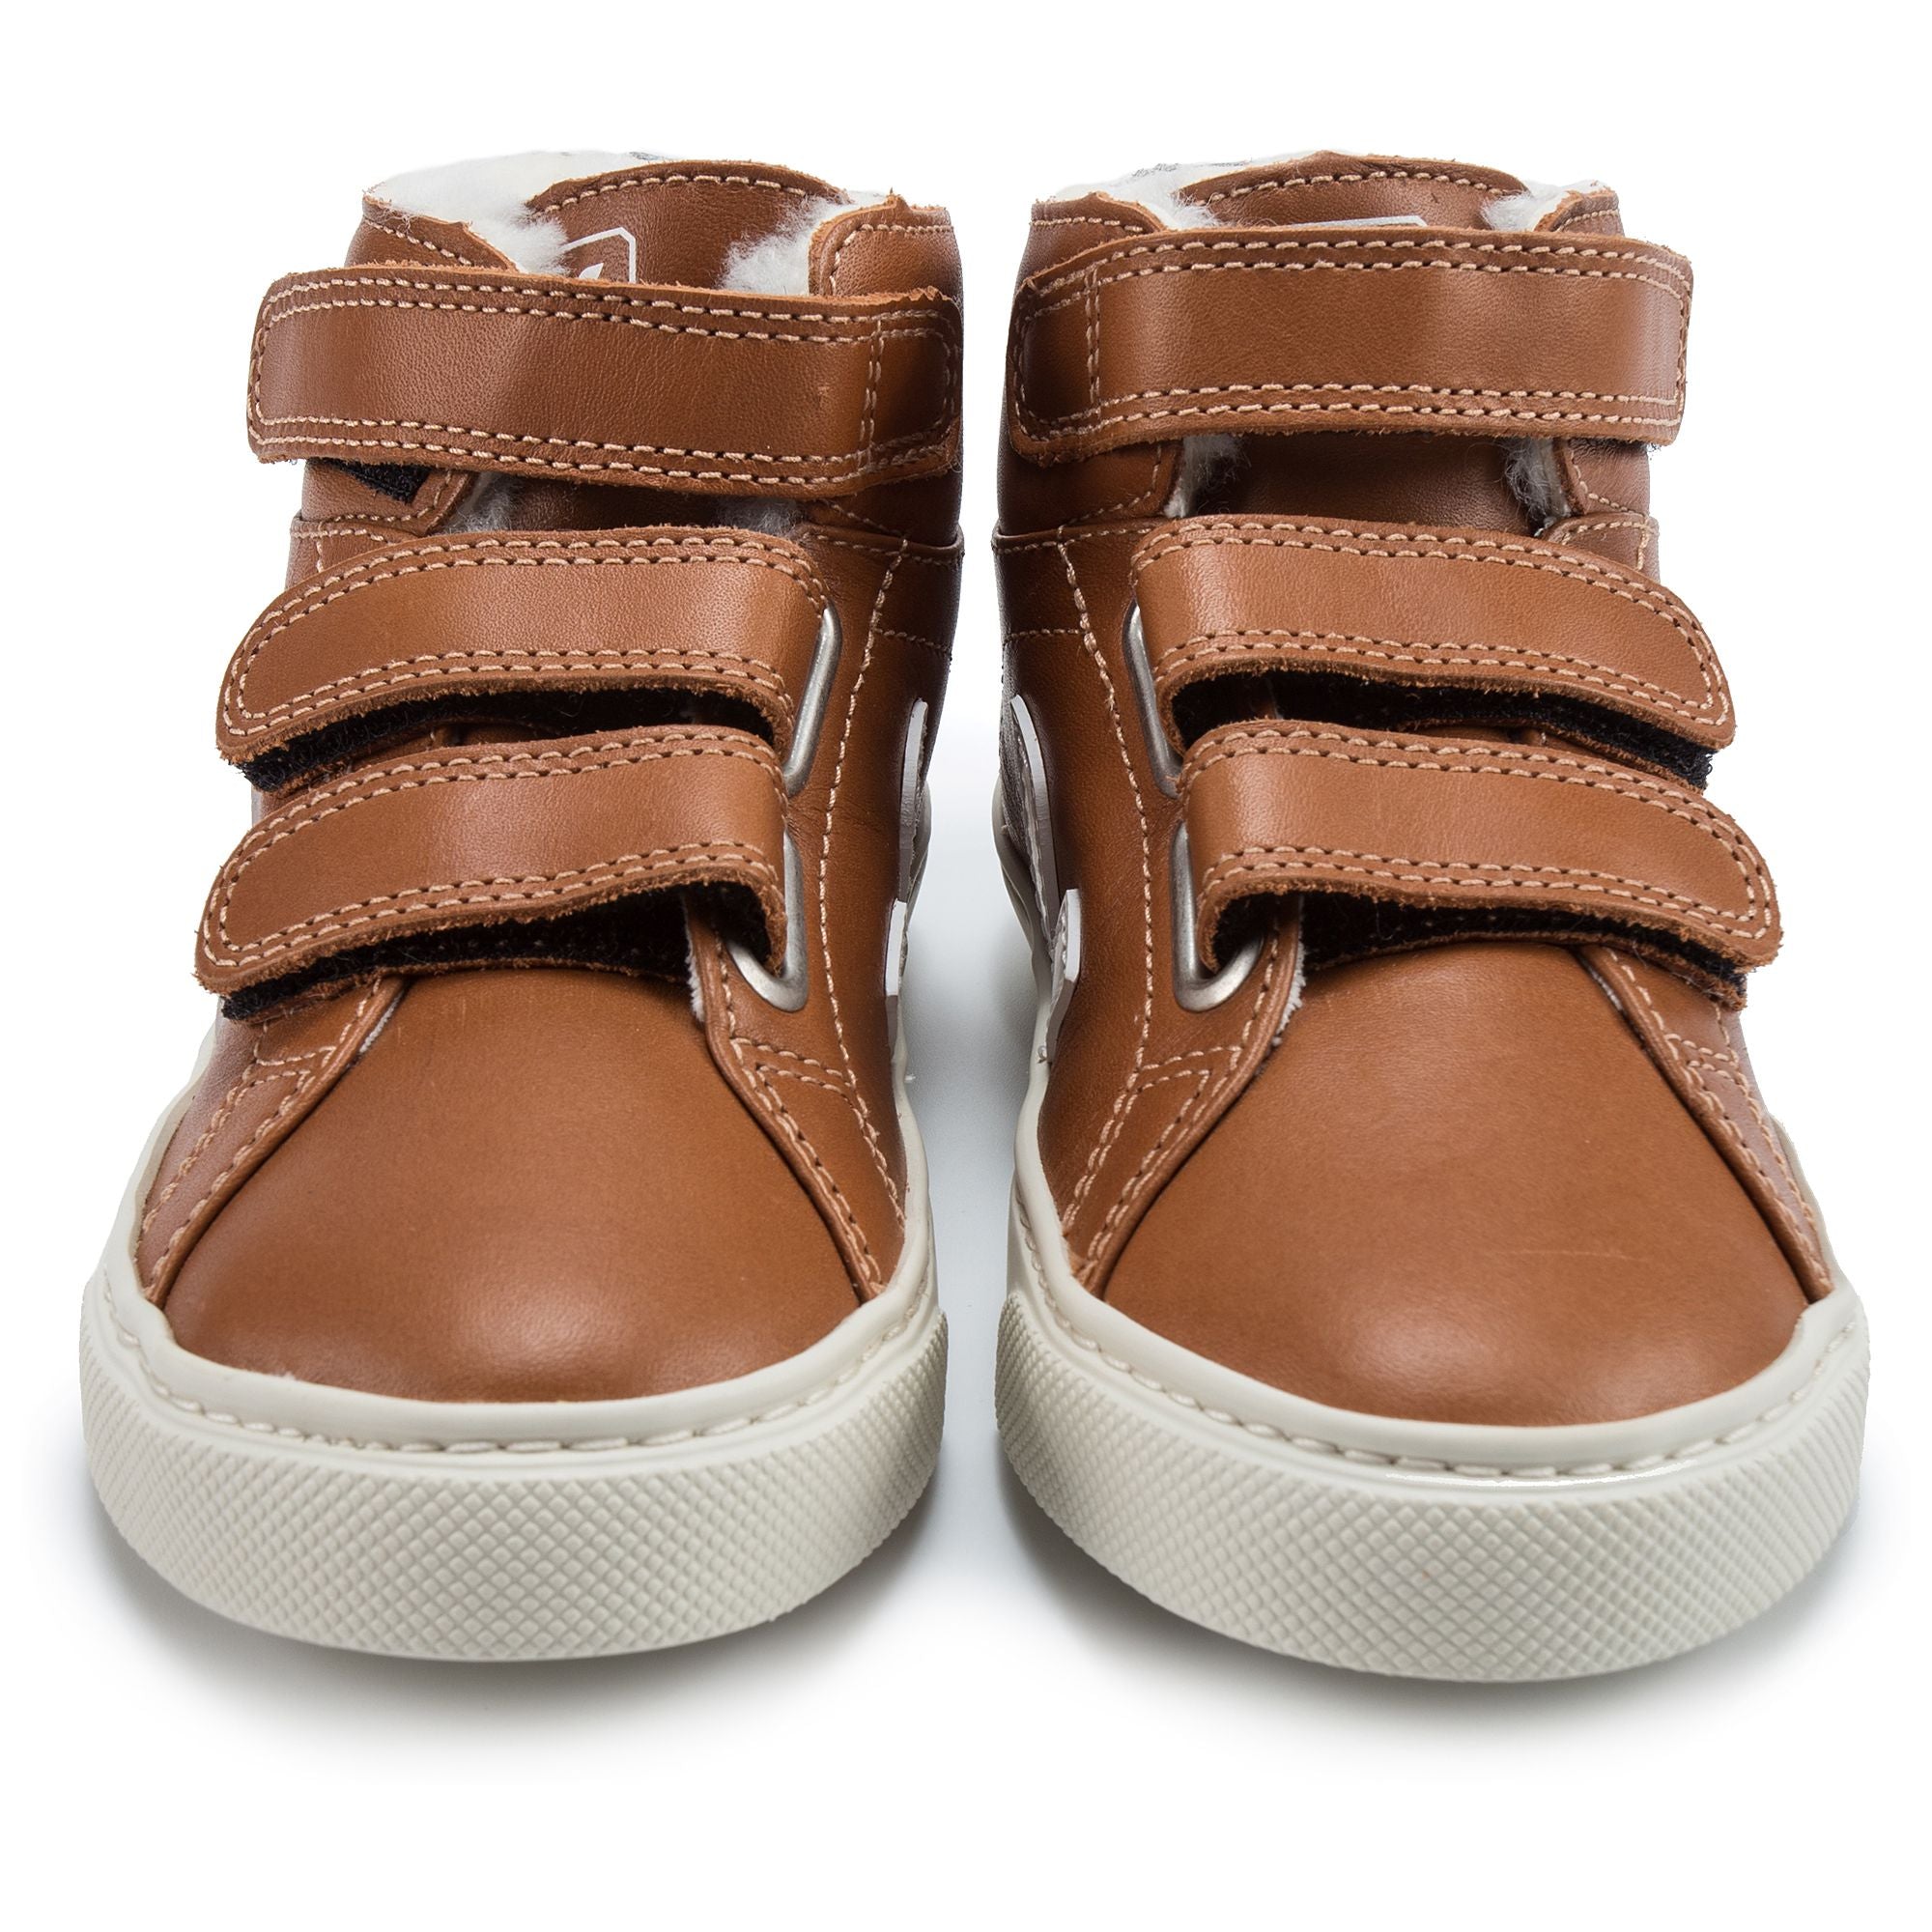 Boys & Girls Brown Leather Velcro High Top Shoes